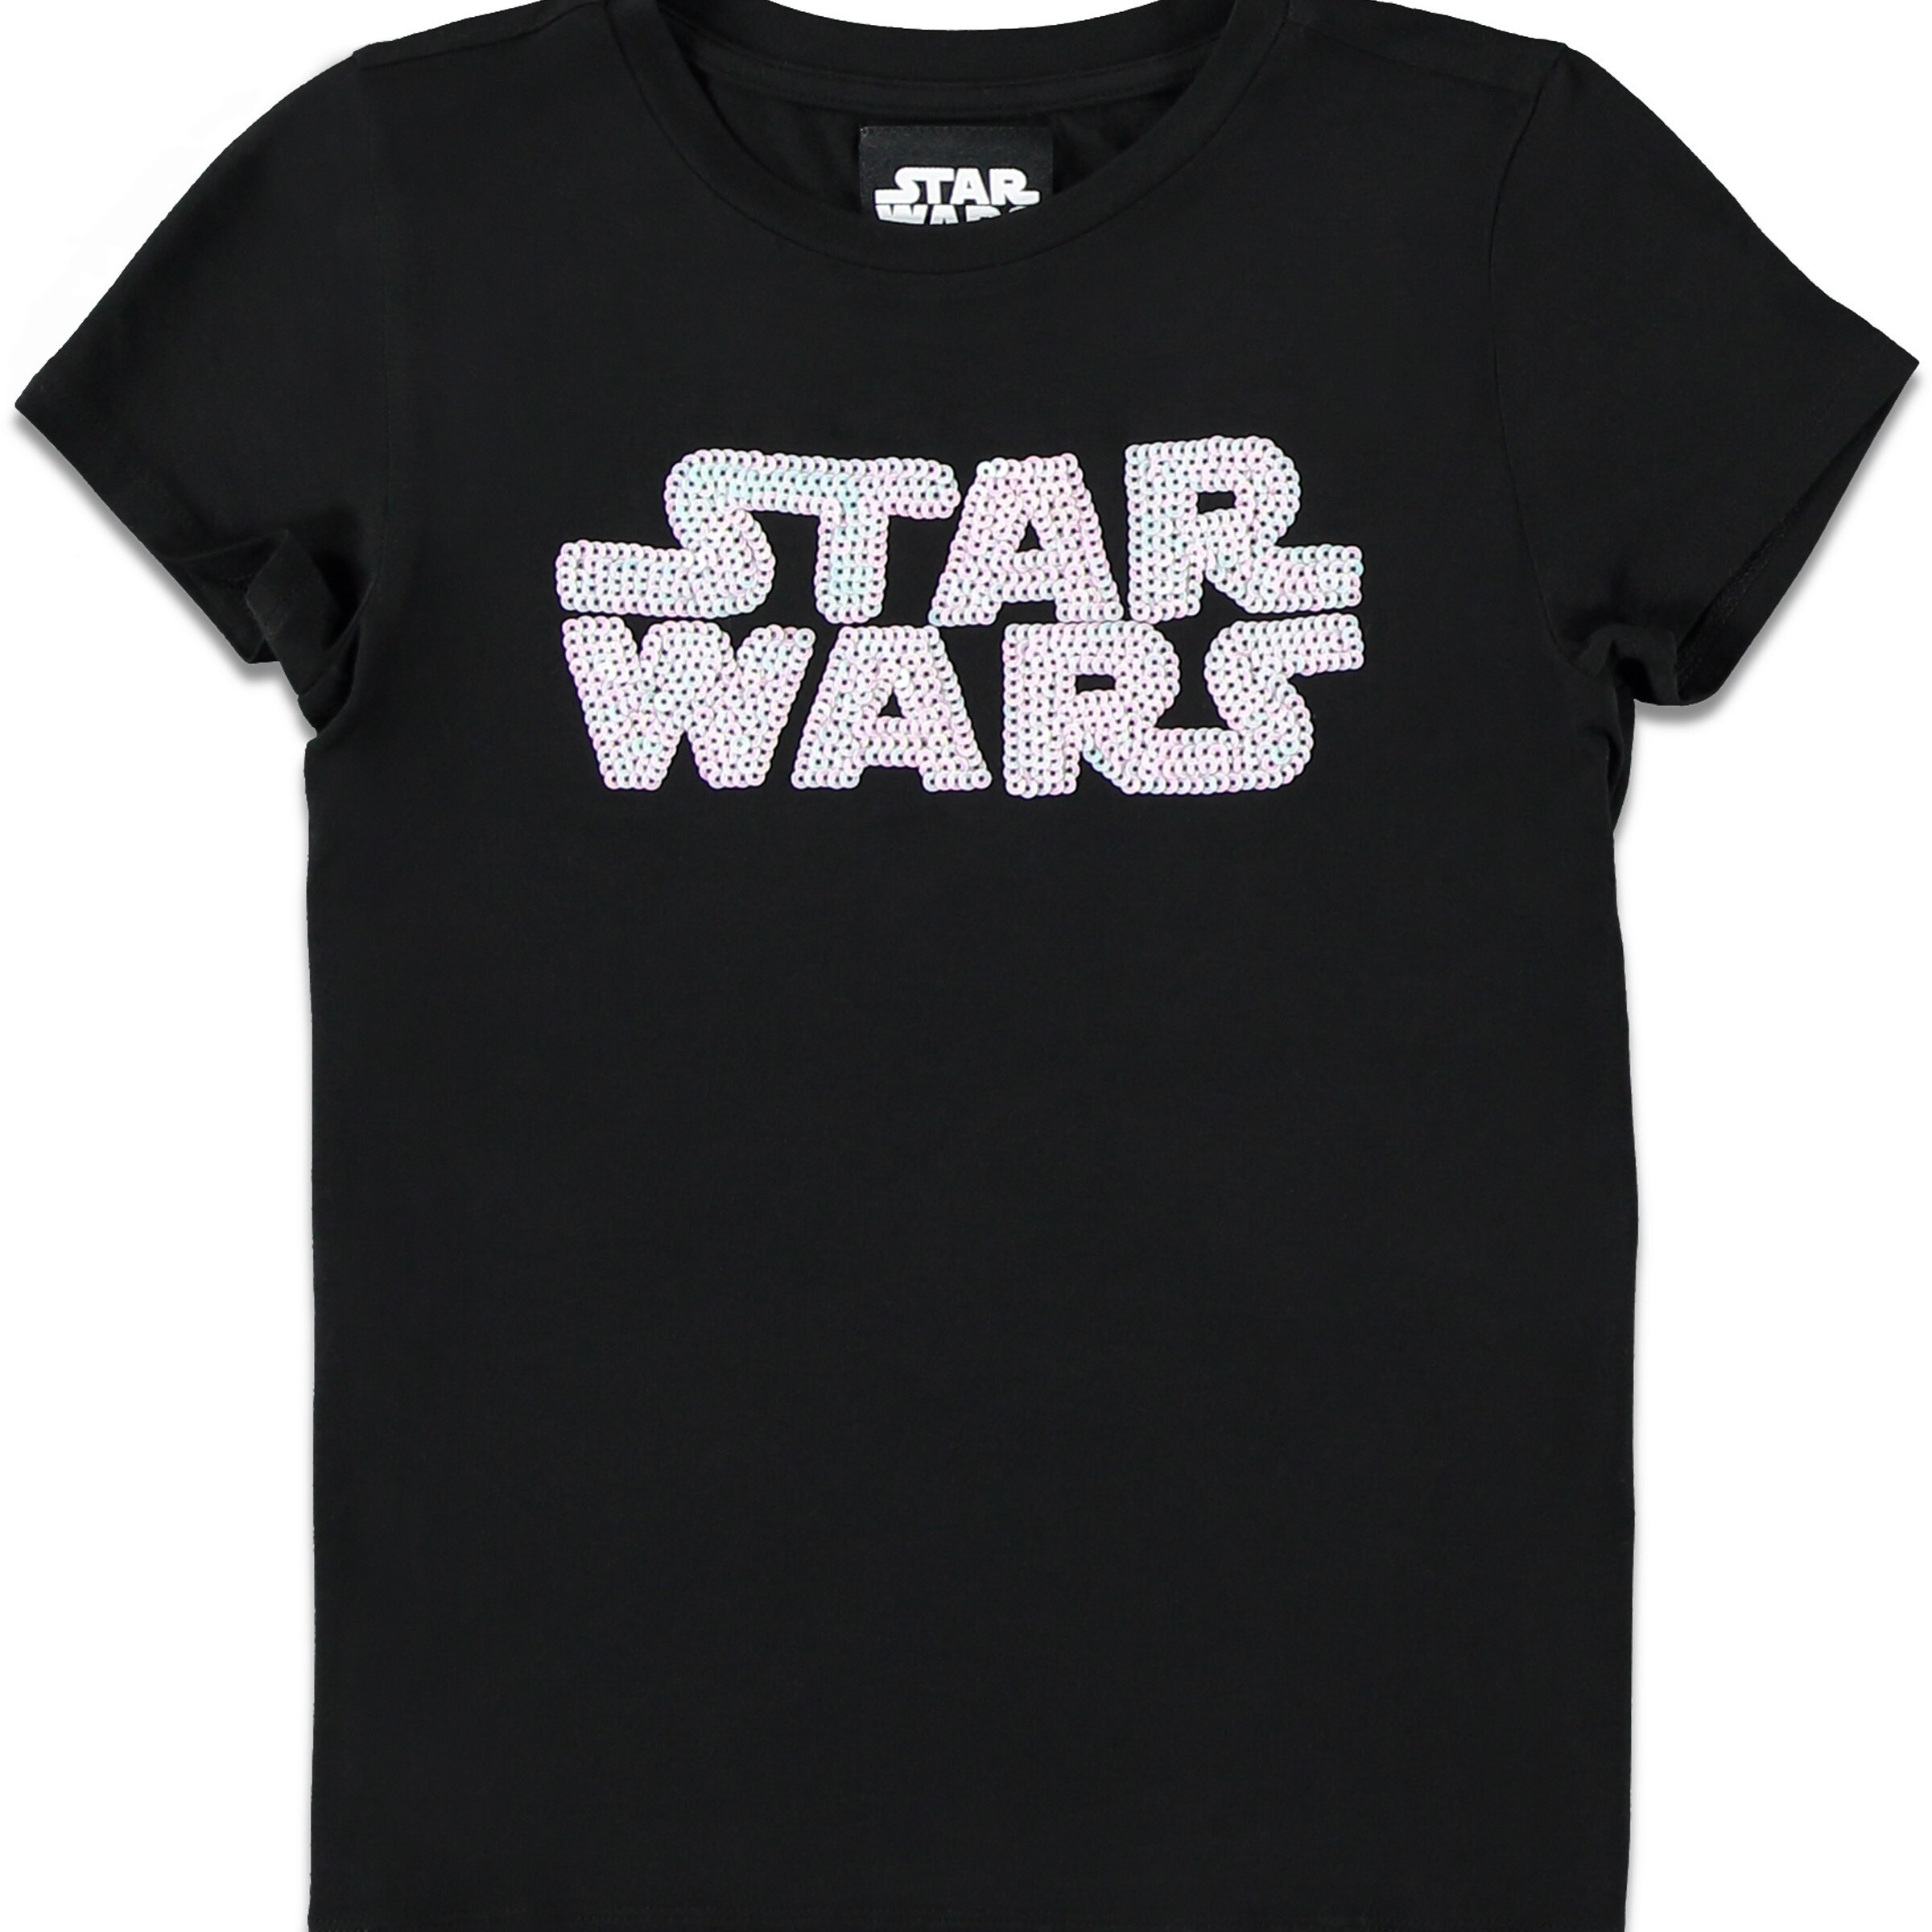 Forever 21 Feels the Force Star Wars Line with New